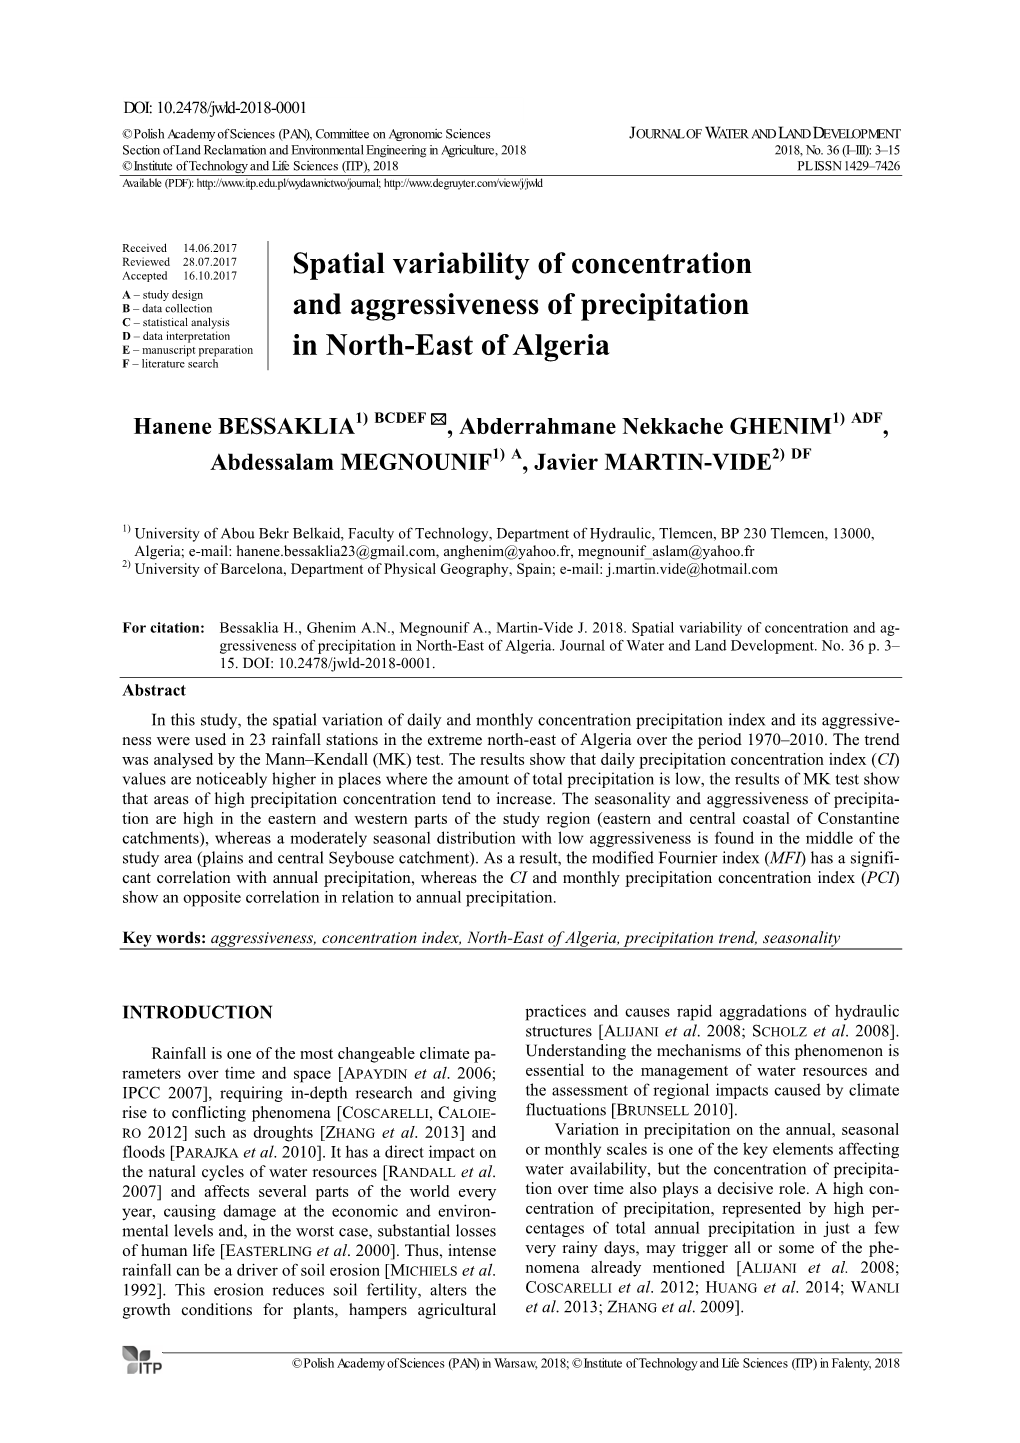 Spatial Variability of Concentration and Aggressiveness of Precipitation in North-East of Algeria 5